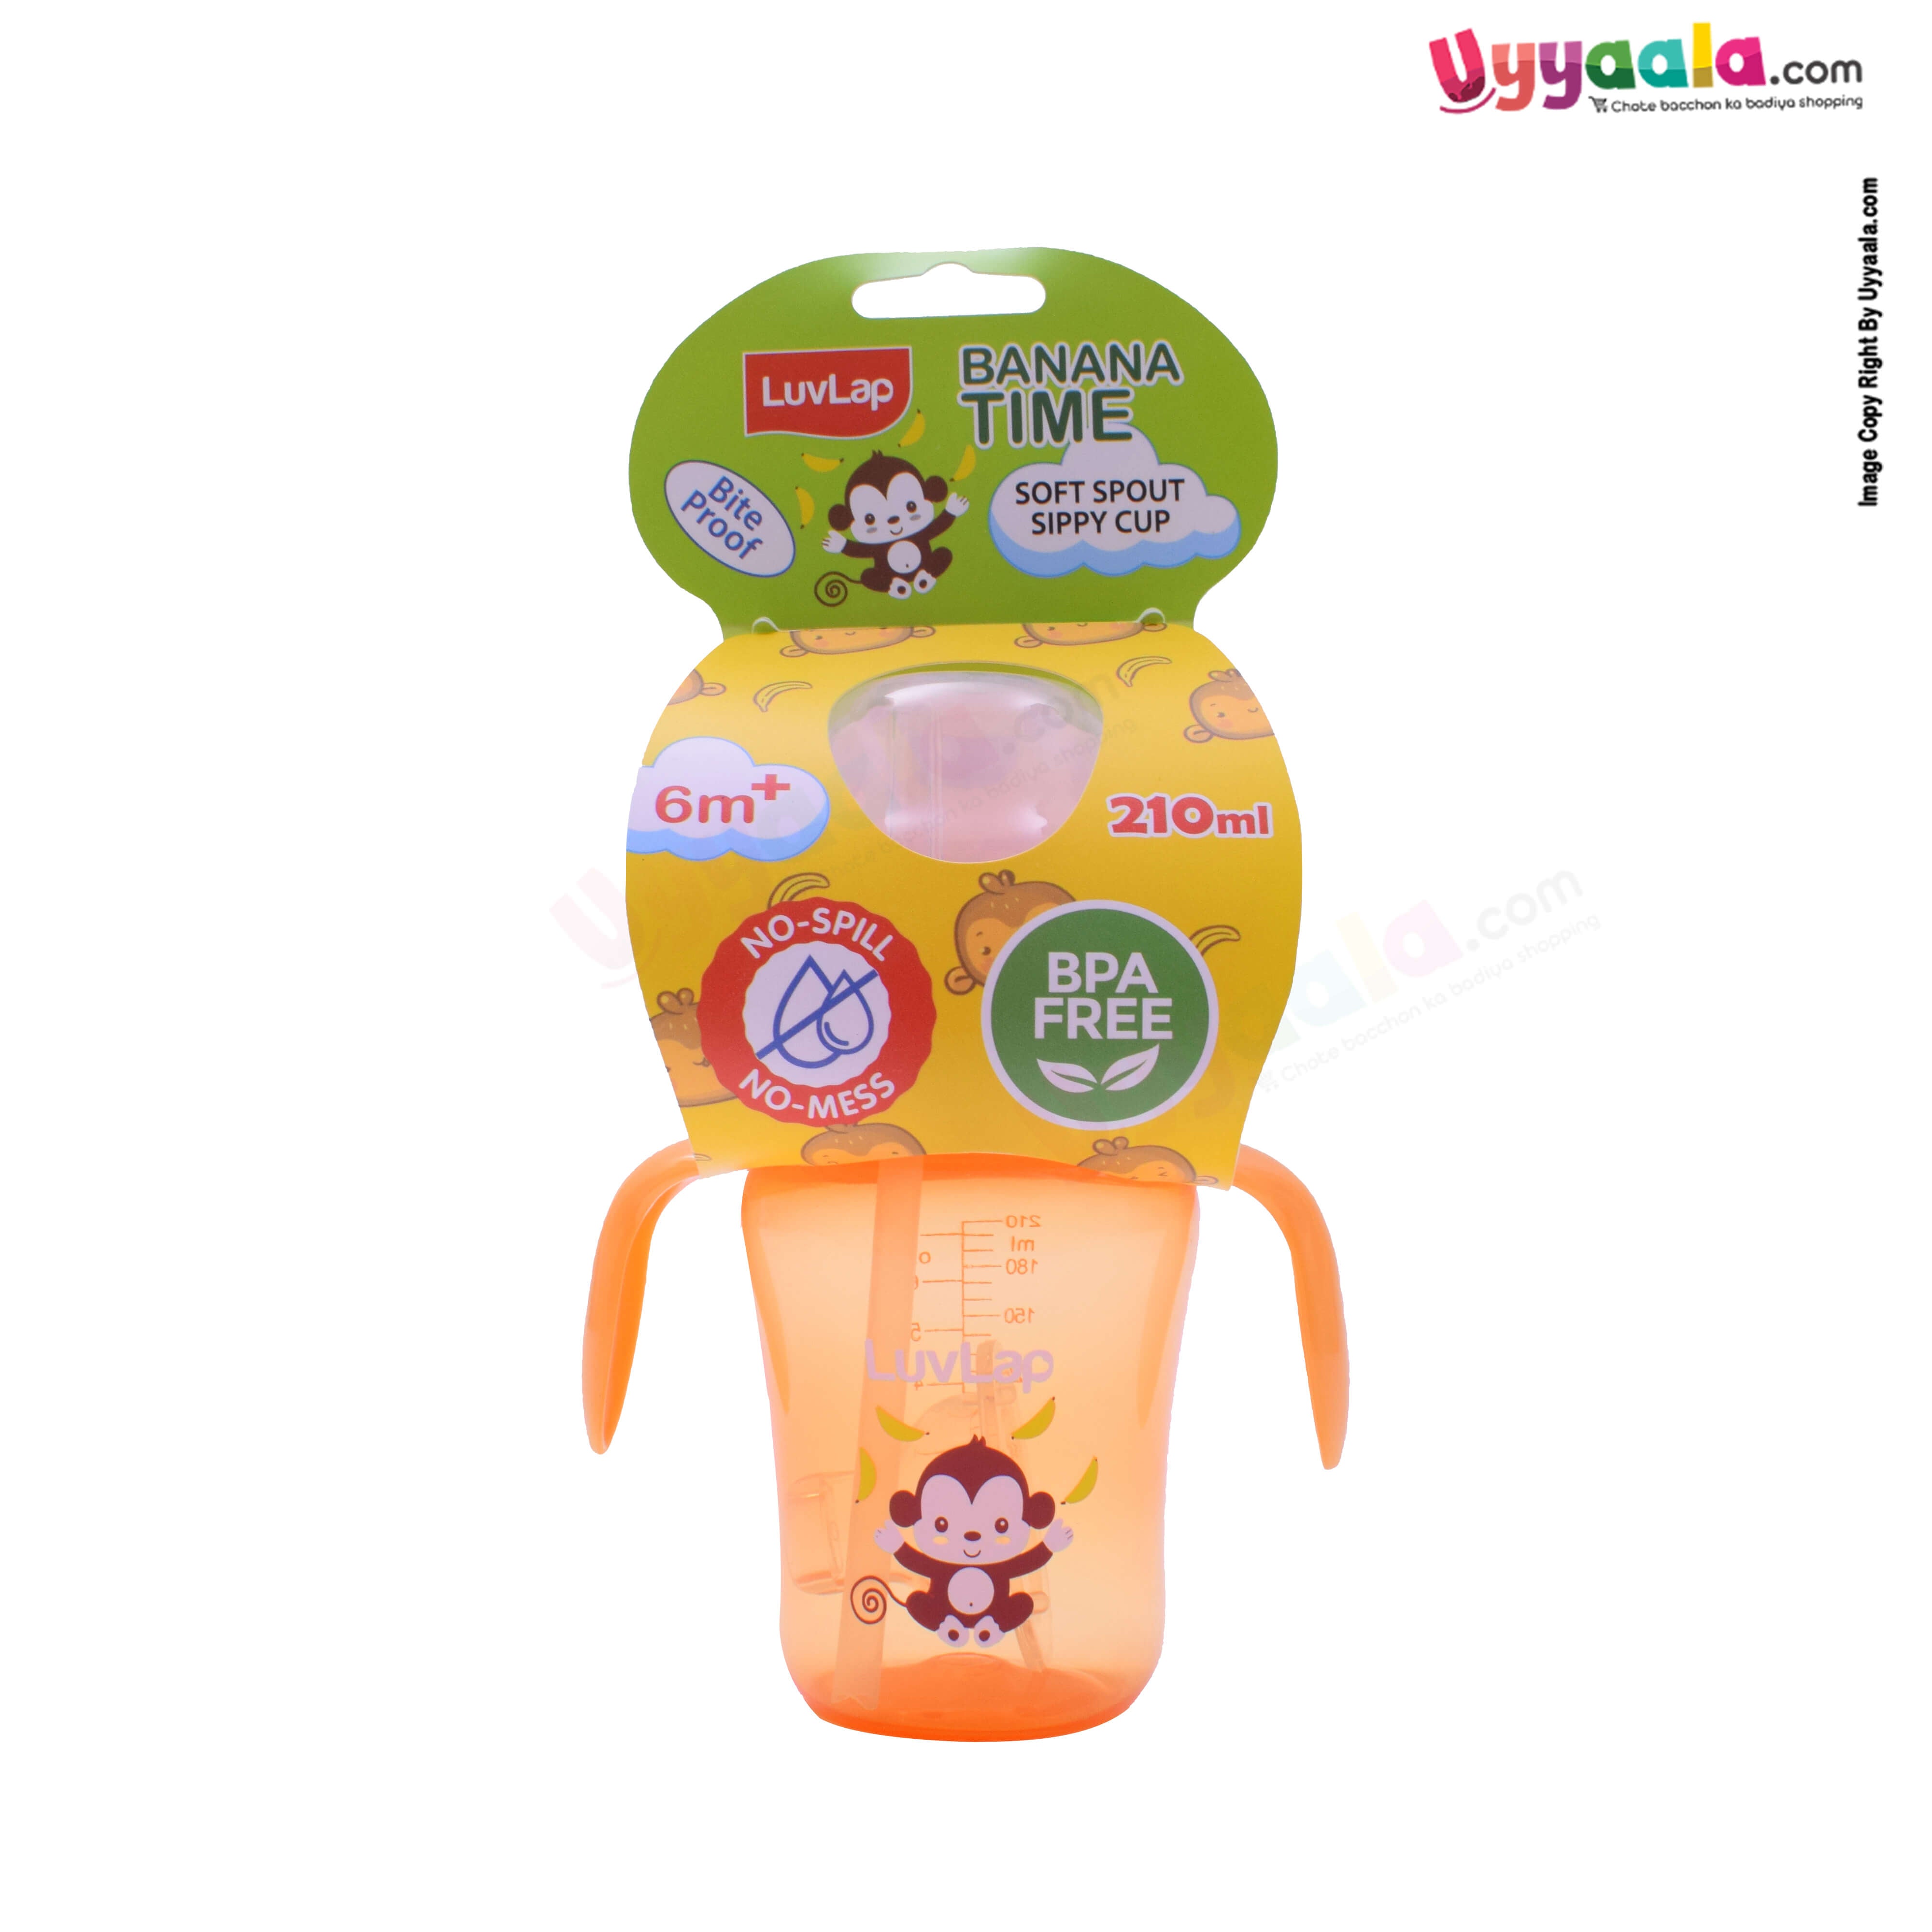 LuvLap Banana time Bite Proof 2 in 1 Soft Spout & Straw Sipper Cup 210ml,6+m Age -Orange